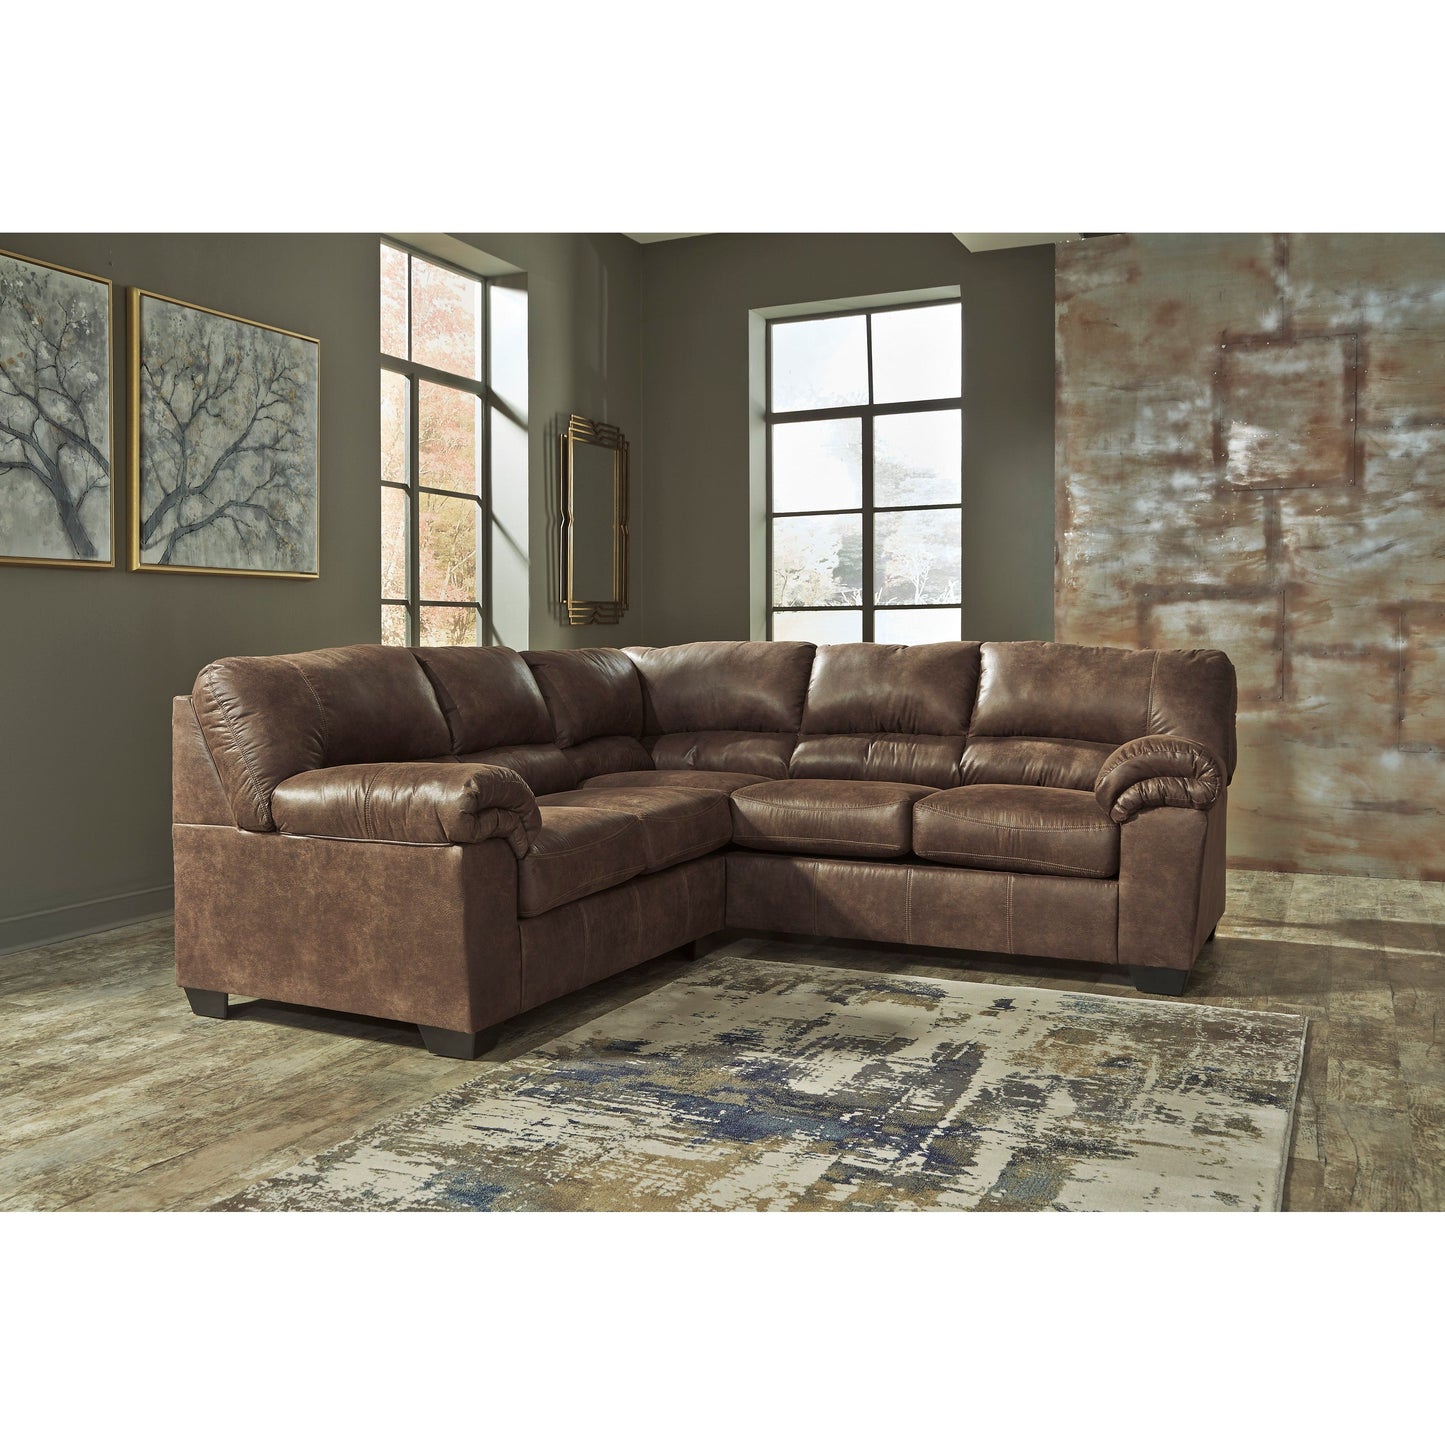 BLADEN 2- PIECE SECTIONAL - COFFEE